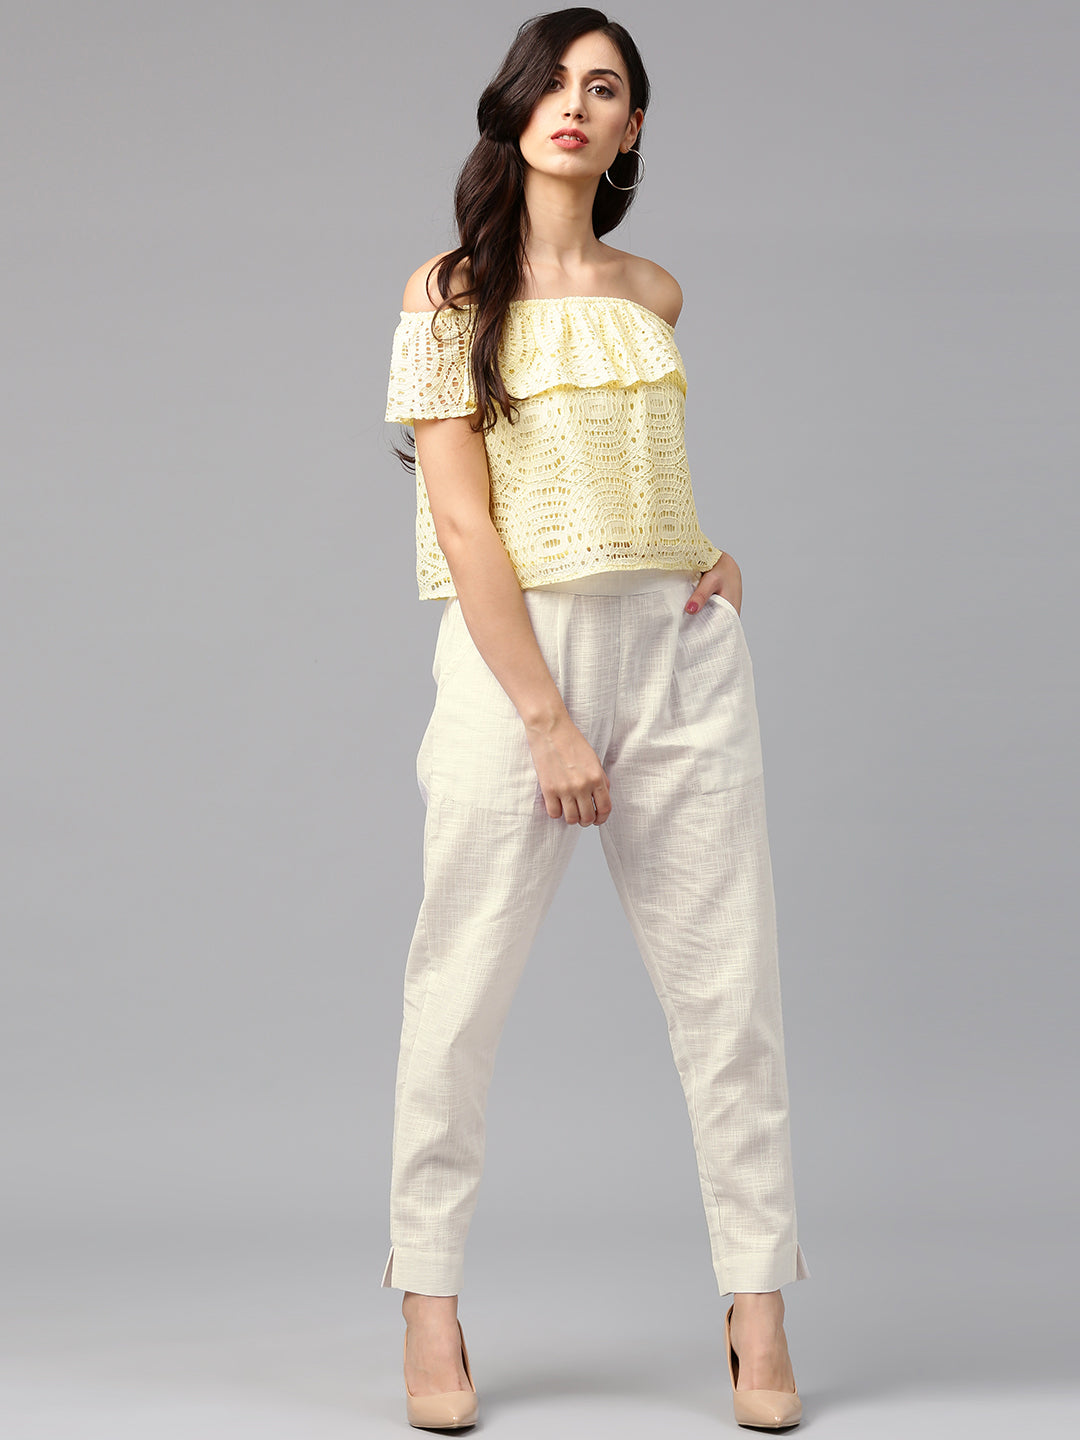 Buy Polo Ralph Lauren Women White Trouser Online  699784  The Collective